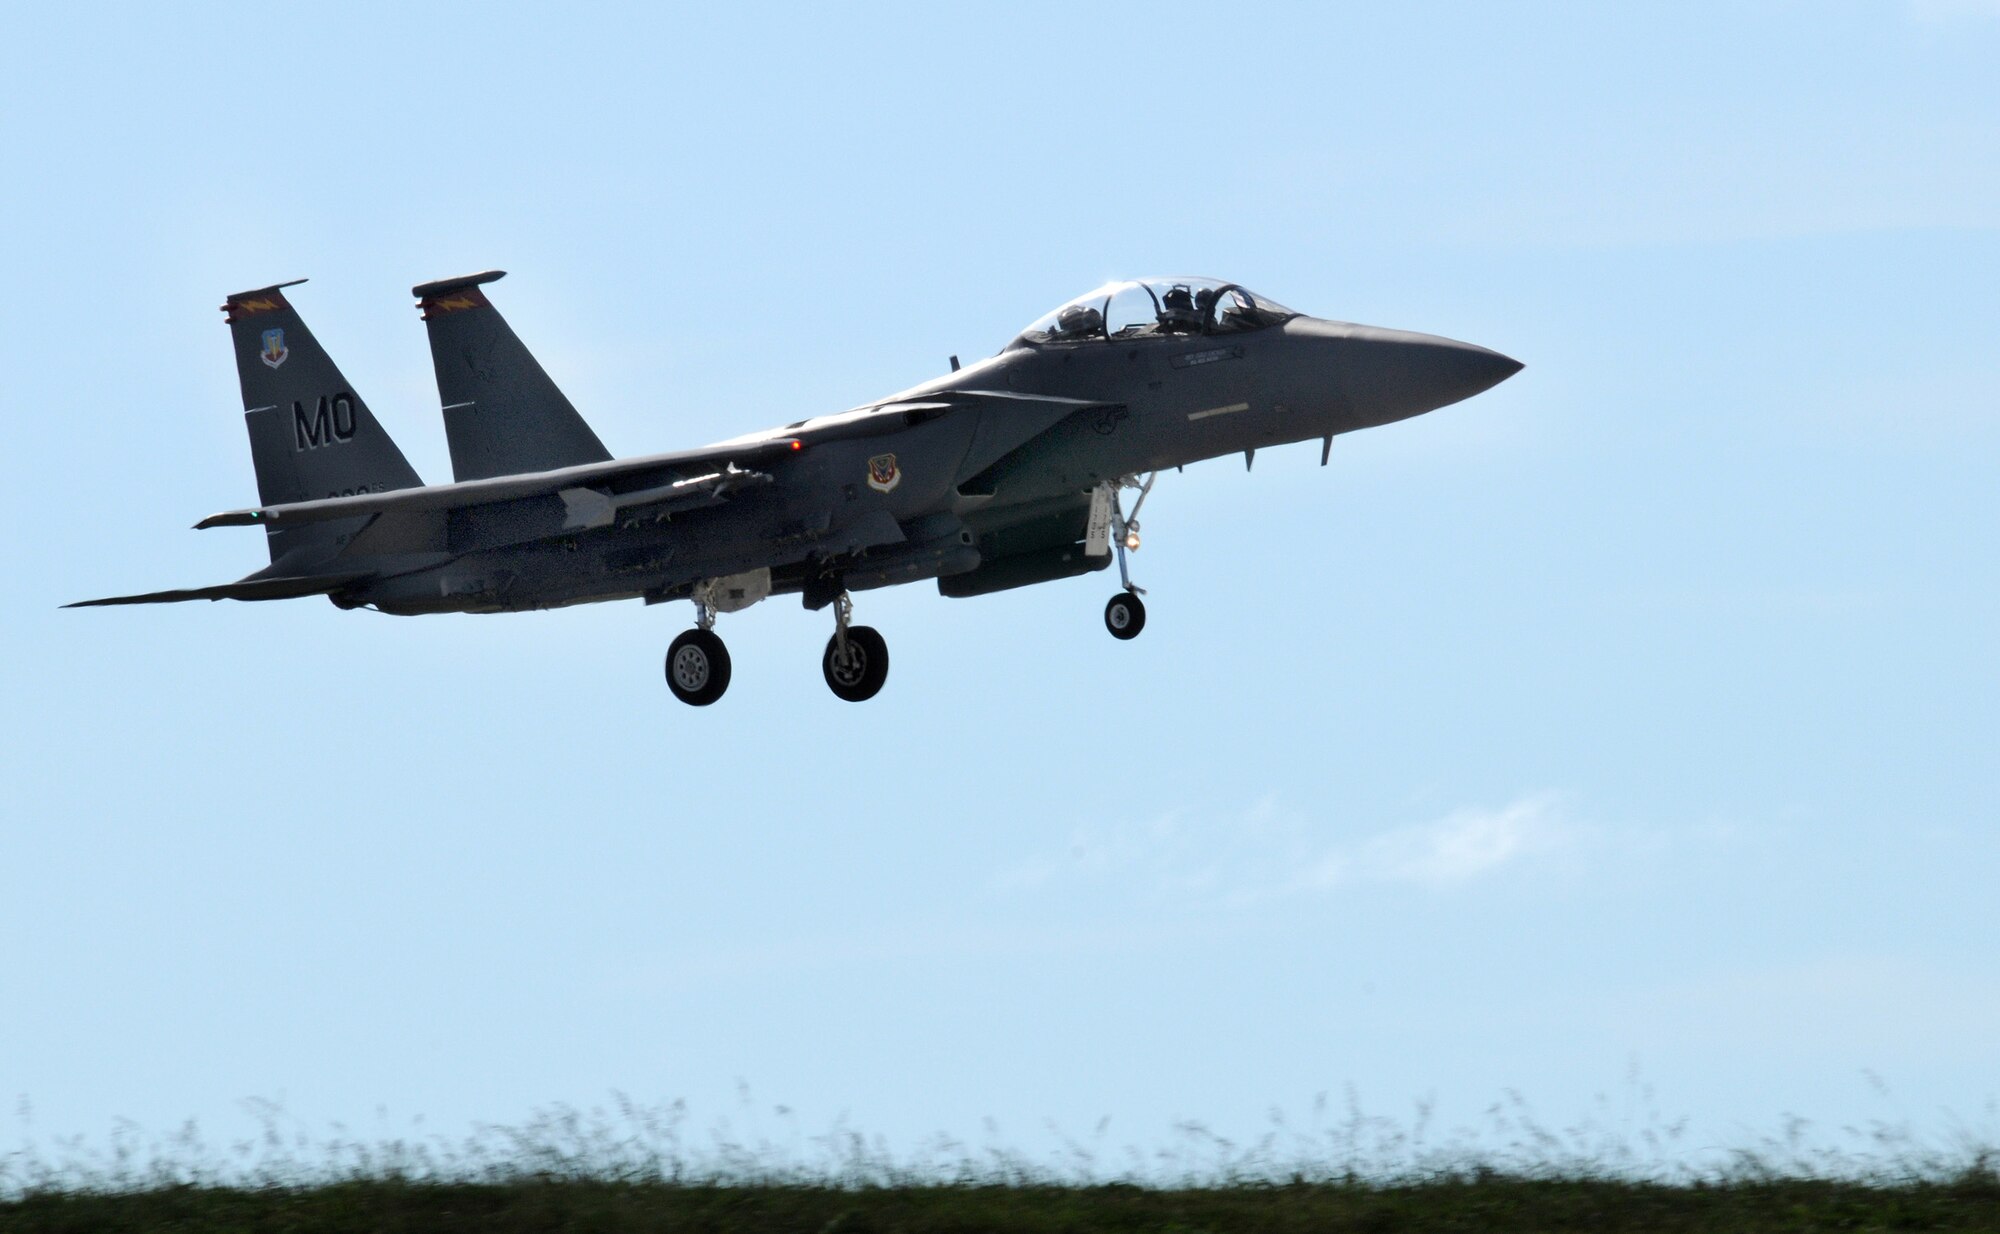 ANDERSEN AIR FORCE BASE, Guam - Brig. Gen. Doug Owens, 36th Wing commander,lands here after more than an hour flying over Guam and the Pacific Aug. 26. He flew in a F-15E Strike Eagle, one of many types of aircraft deployed here. (U.S. Air Force photo by Airman 1st Class Courtney Witt)